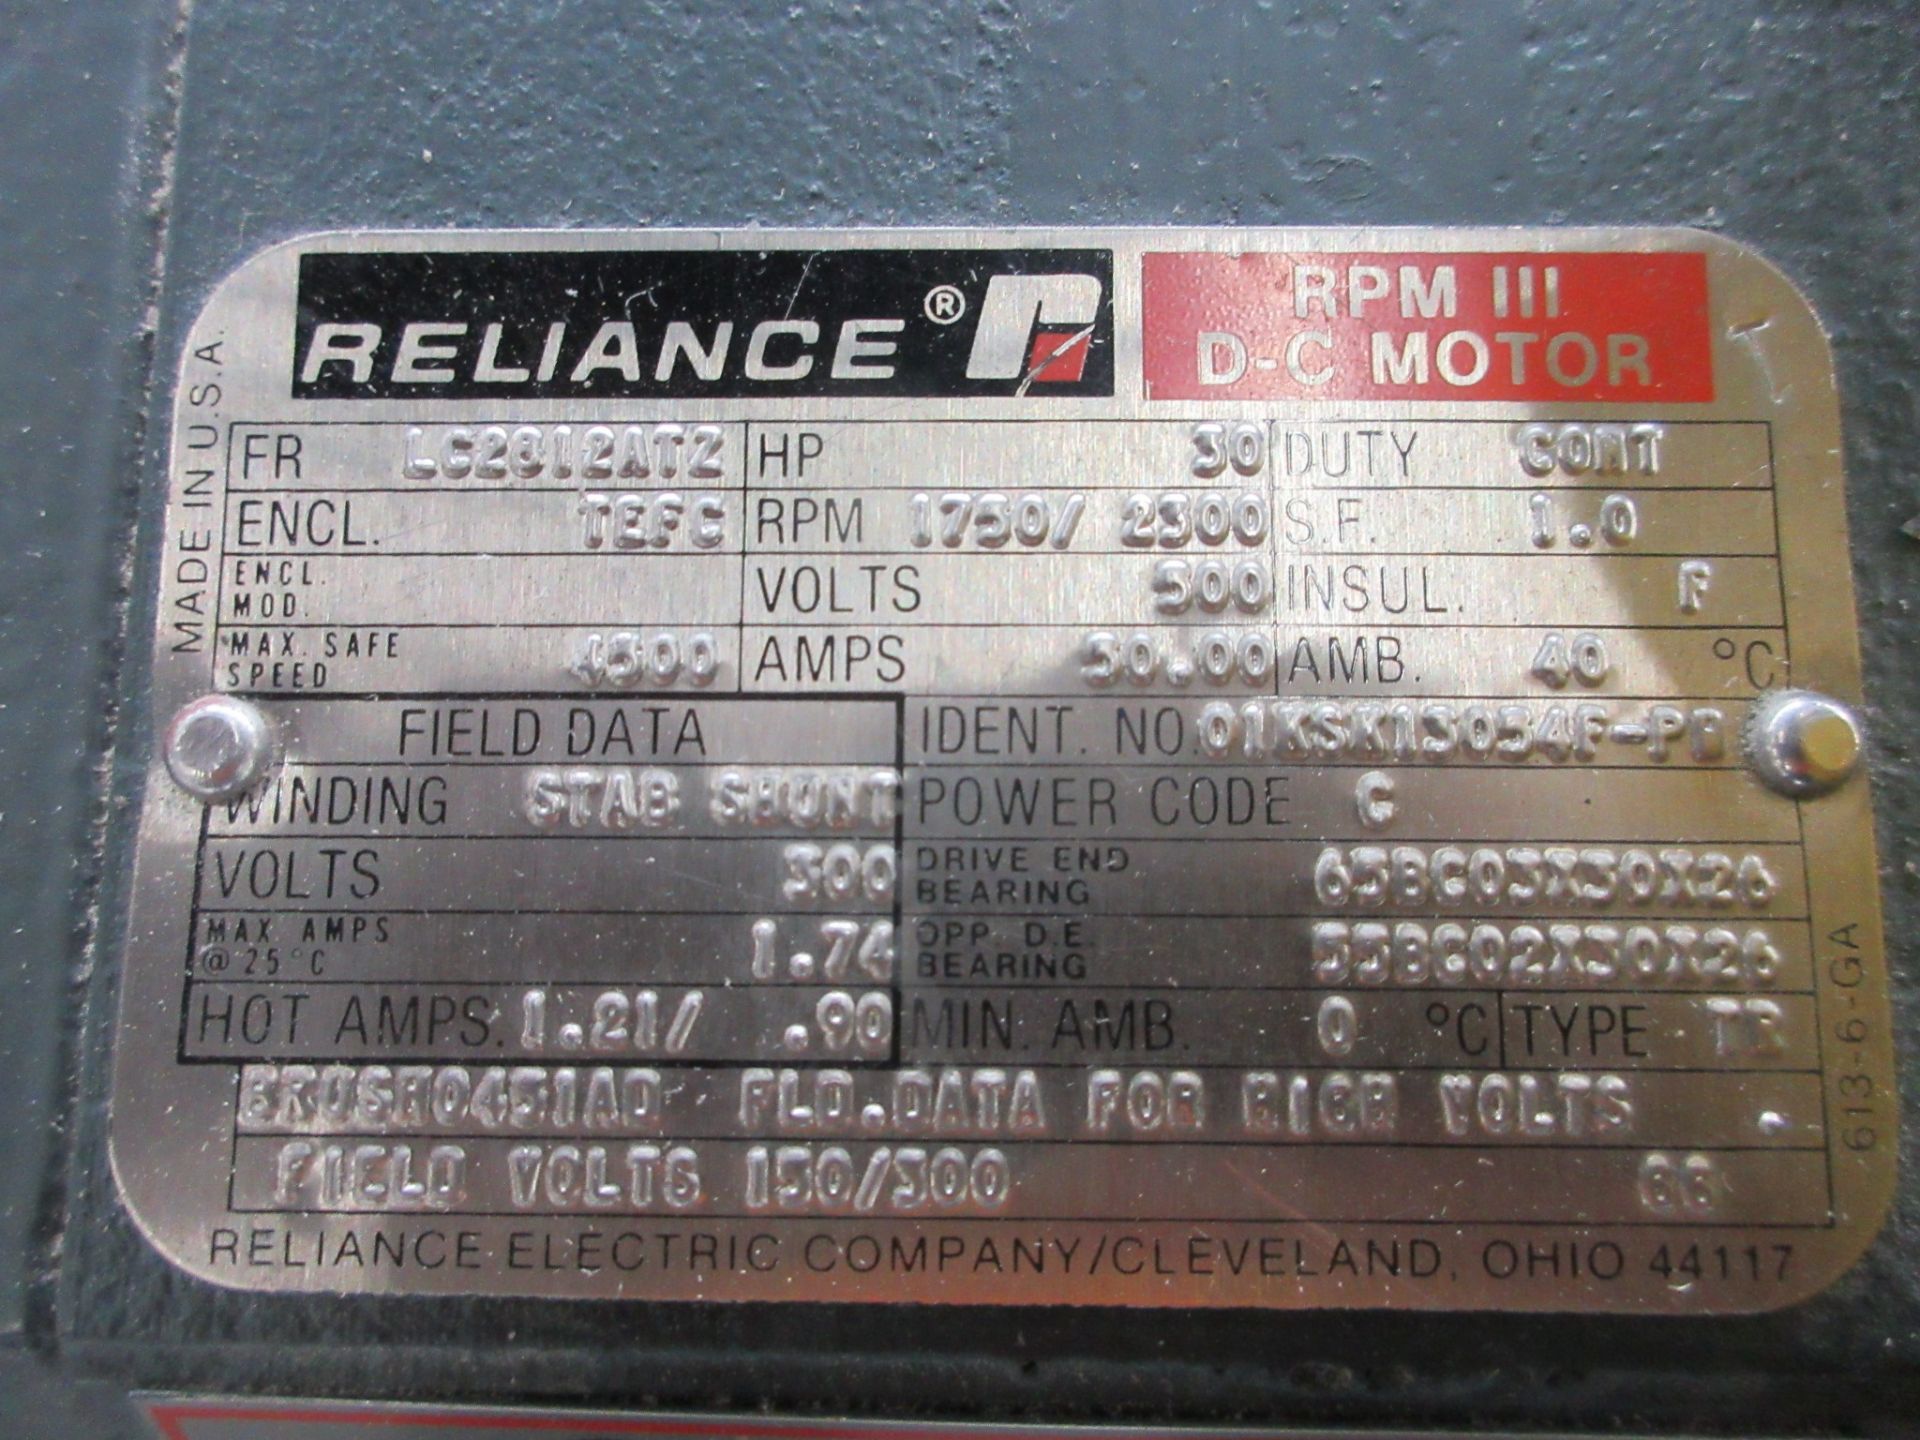 RELIANCE RPM III D-C MOTOR, 30HP, 500V, 1,750 / 2,300 RPM, LC2812AT2 FRAME (SOUTHWEST WAREHOUSE) - Image 2 of 3